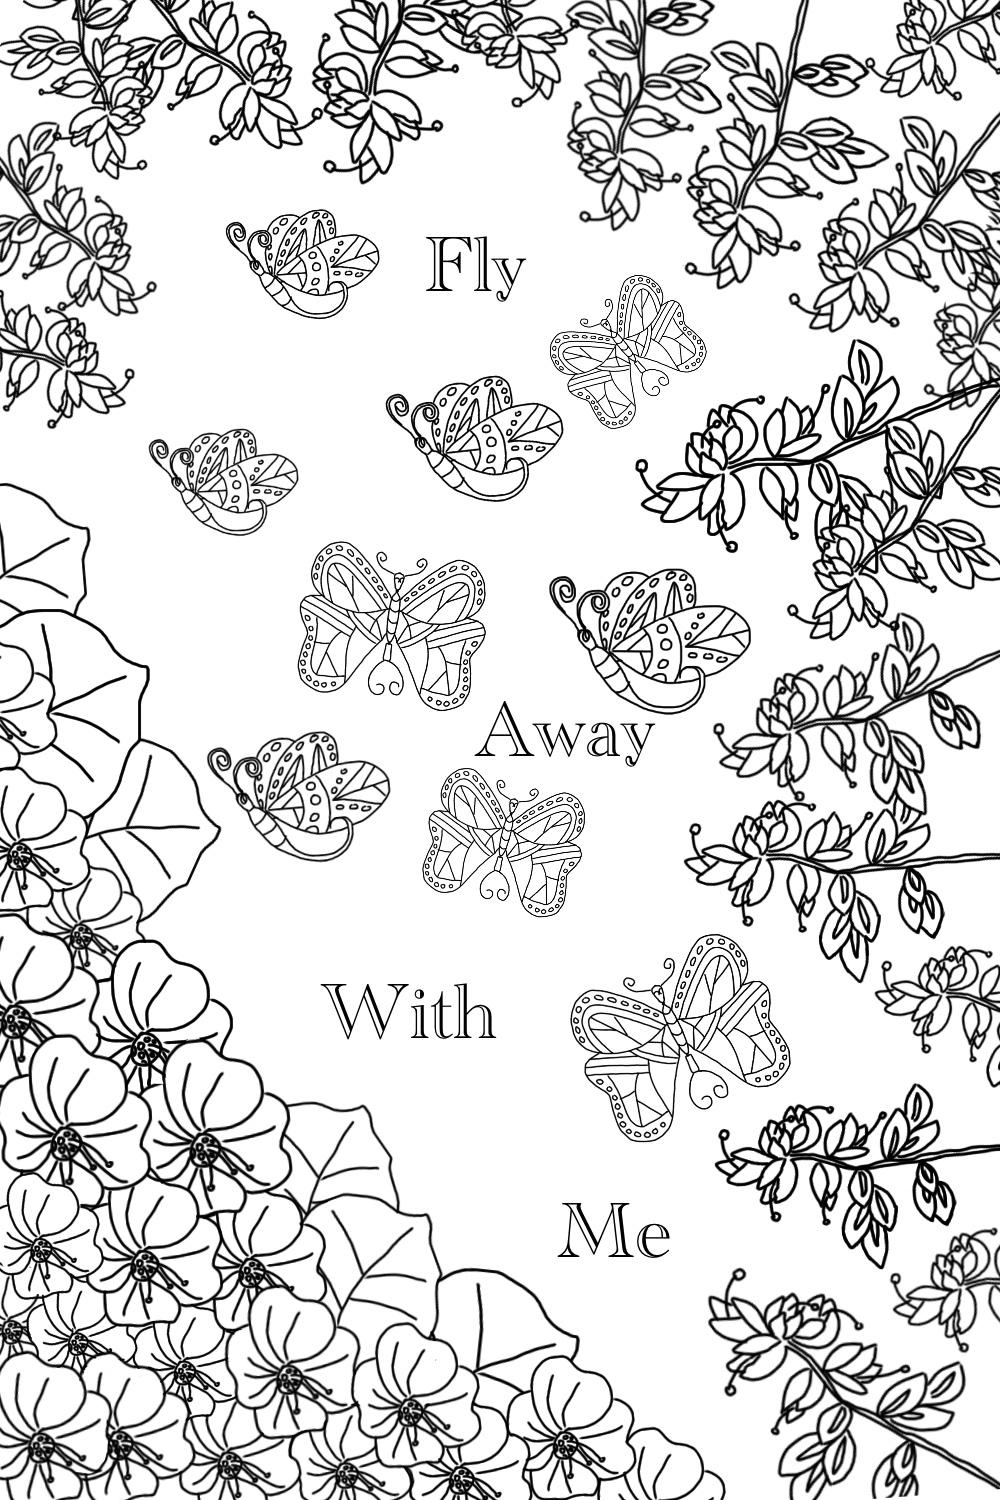 Fly Away With Me Valentine Coloring Card